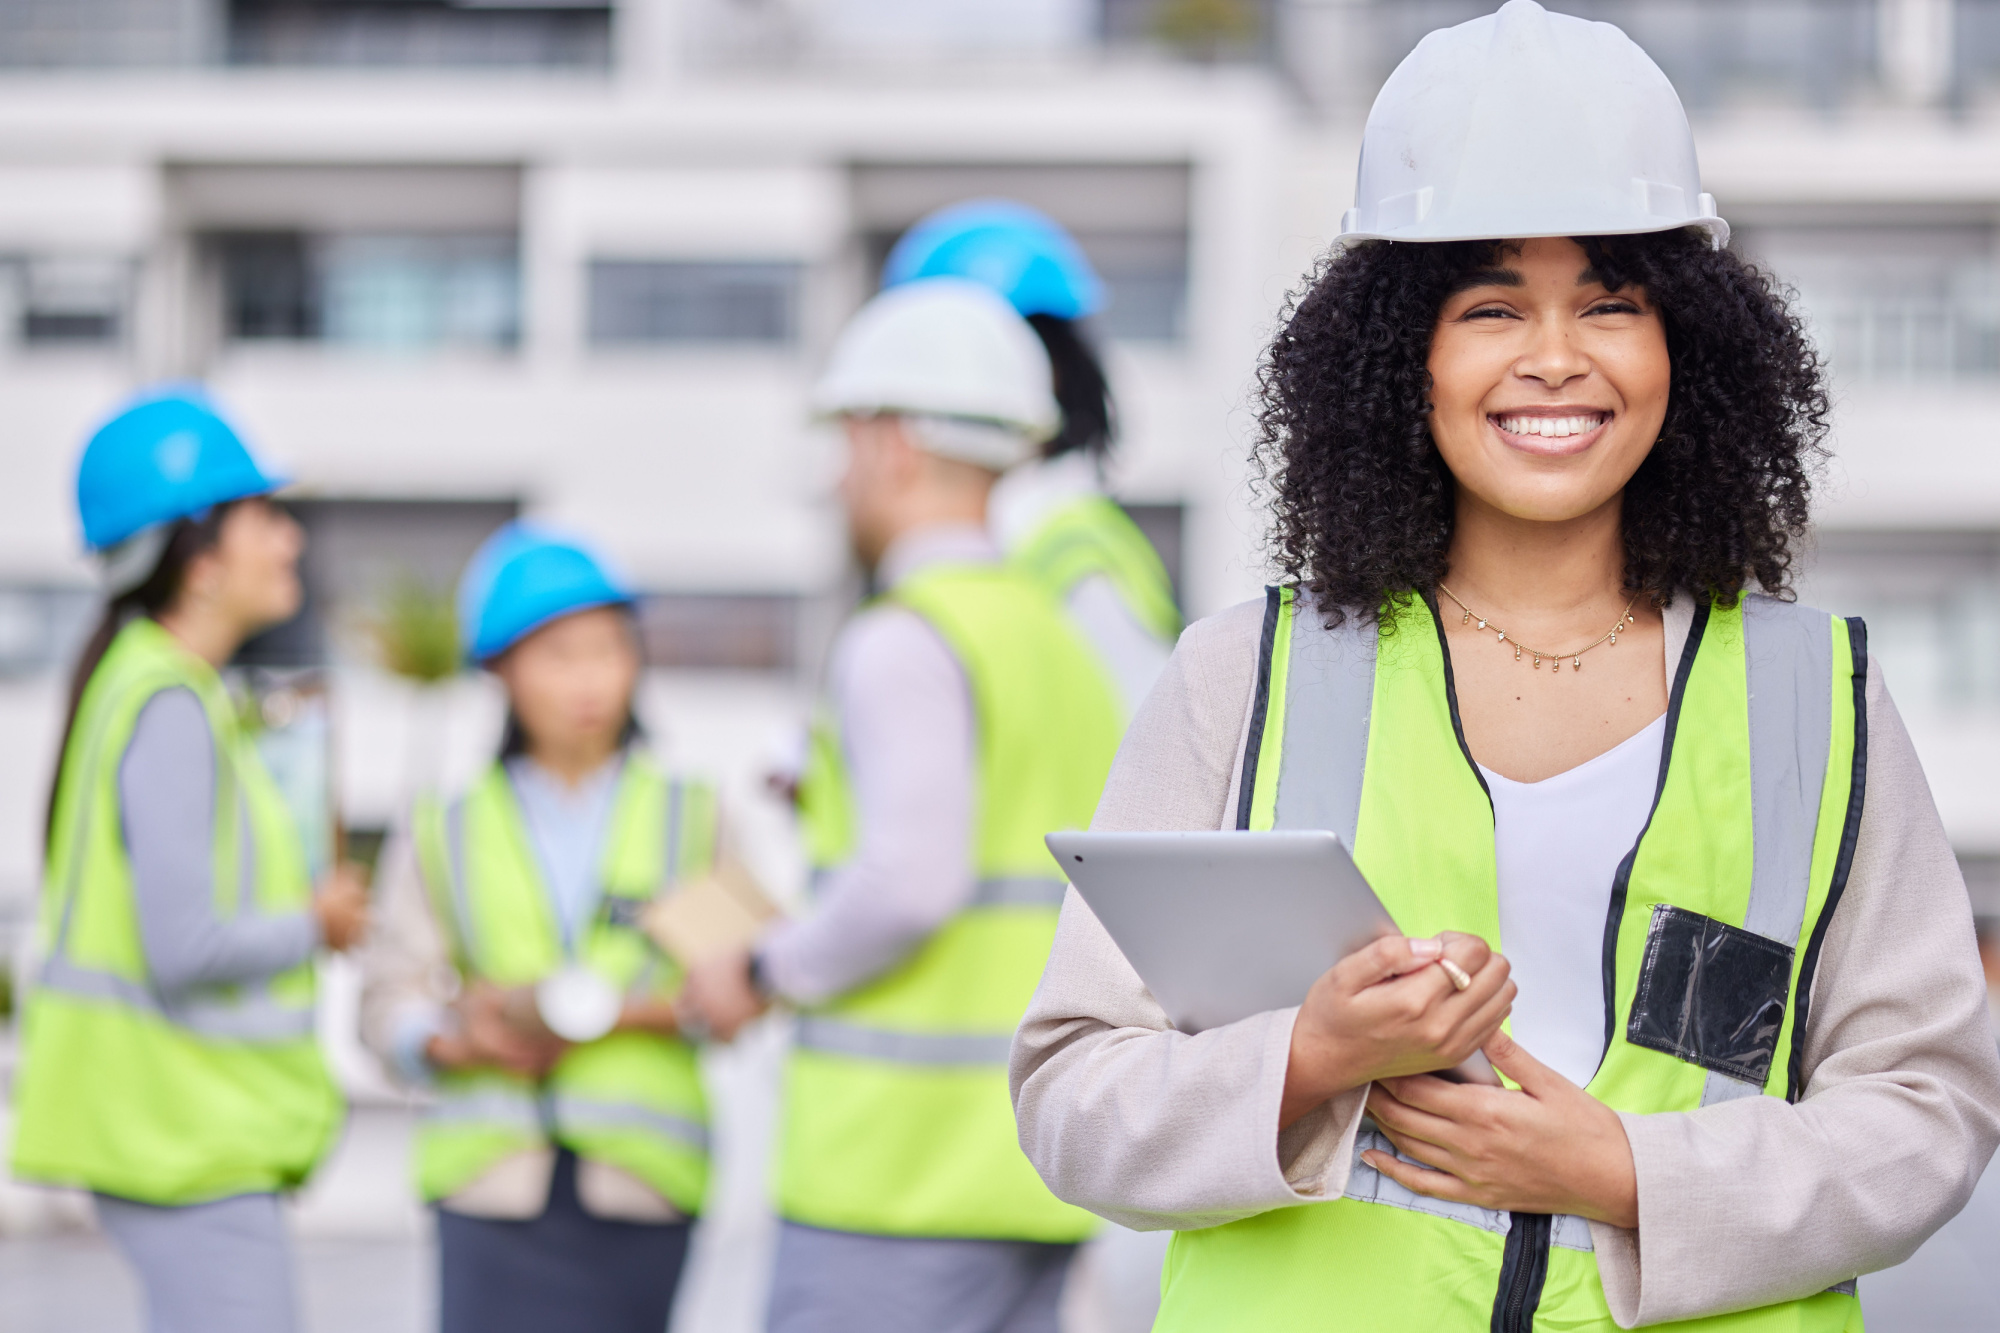 woman in construction gear smiling with blurred construction workers in background